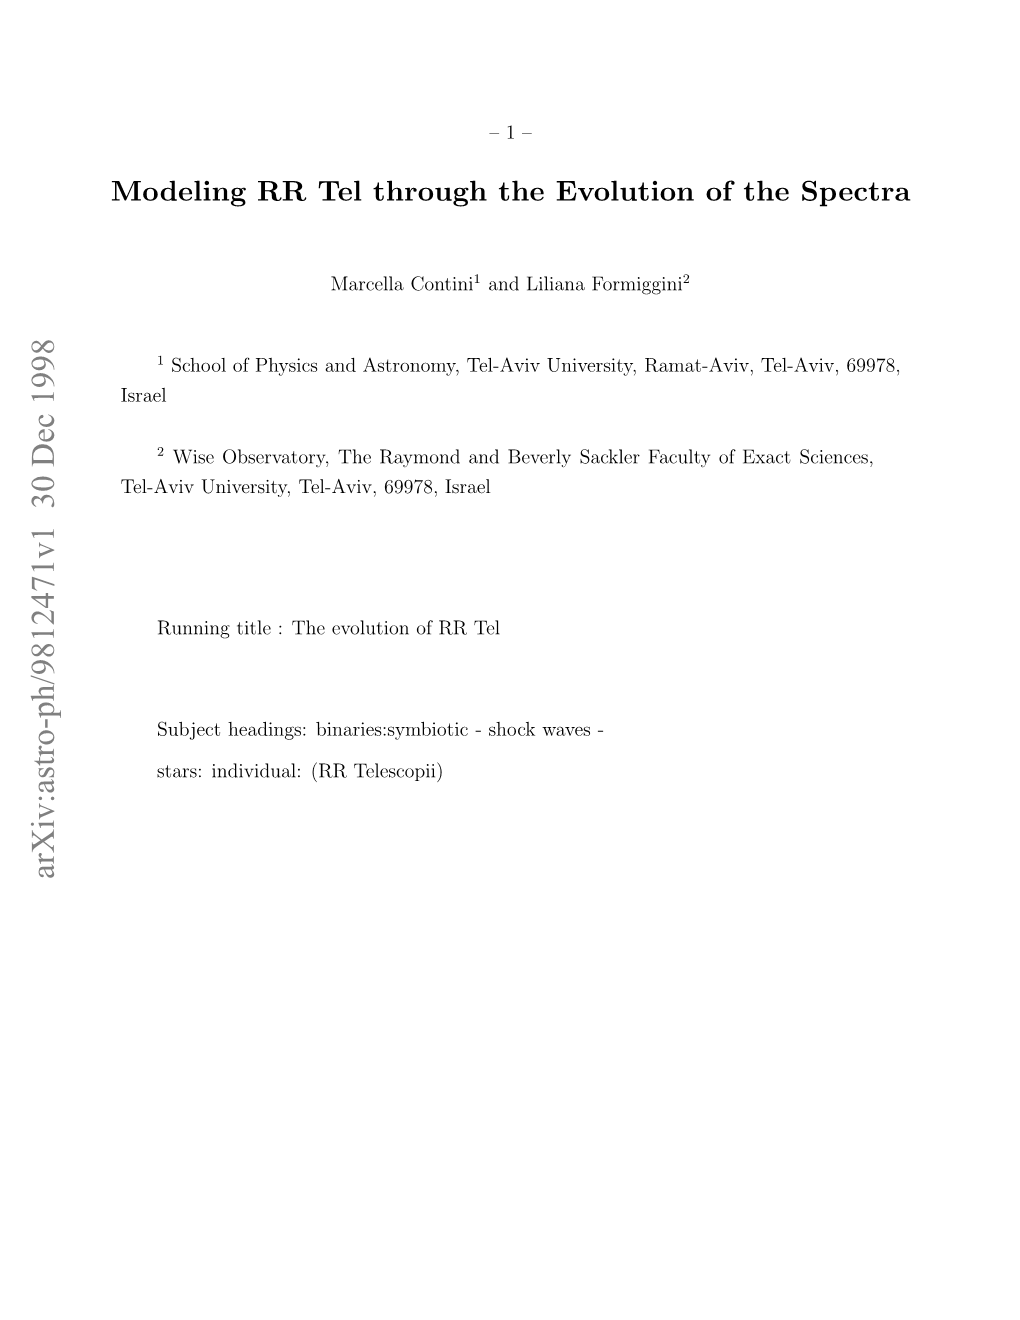 Modeling RR Tel Through the Evolution of the Spectra